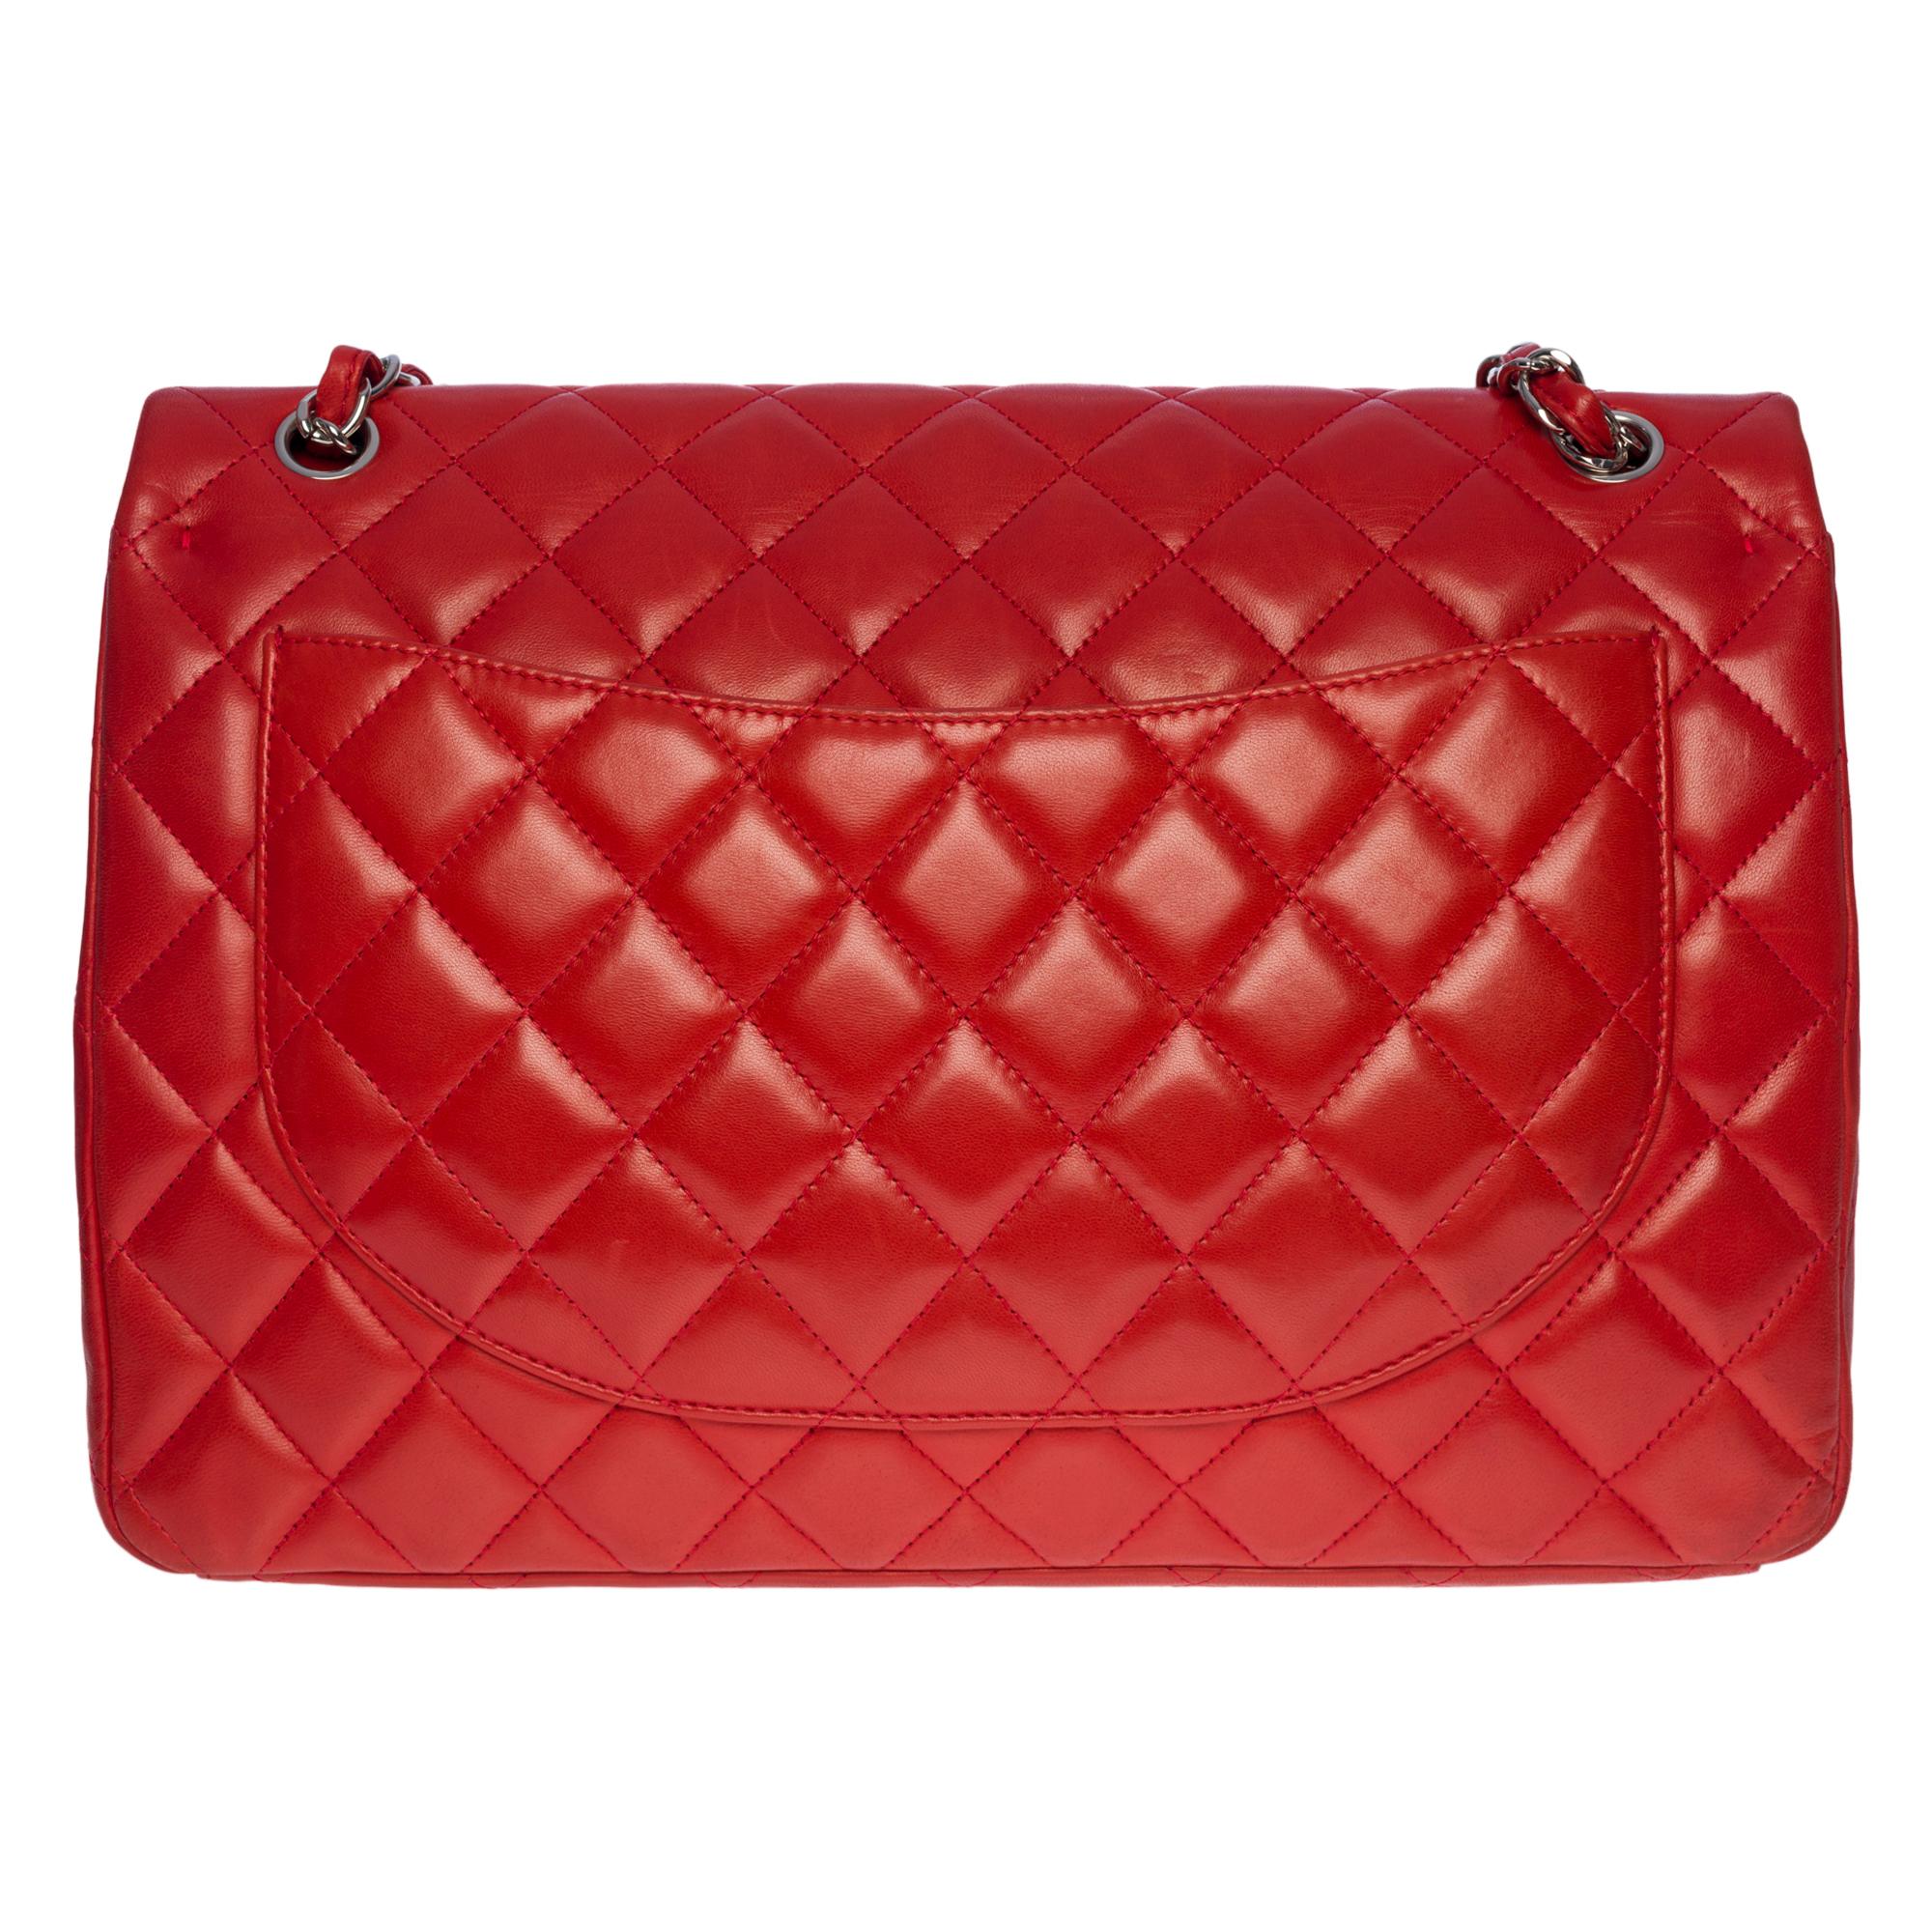 Majestic Chanel Timeless Maxi Jumbo handbag in red poppy quilted leather, silver-tone metal hardware, a silver-tone metal chain handle interlaced with red leather for hand and shoulder support 

Backpack pocket 
Flap closure, silver CC logo clasp